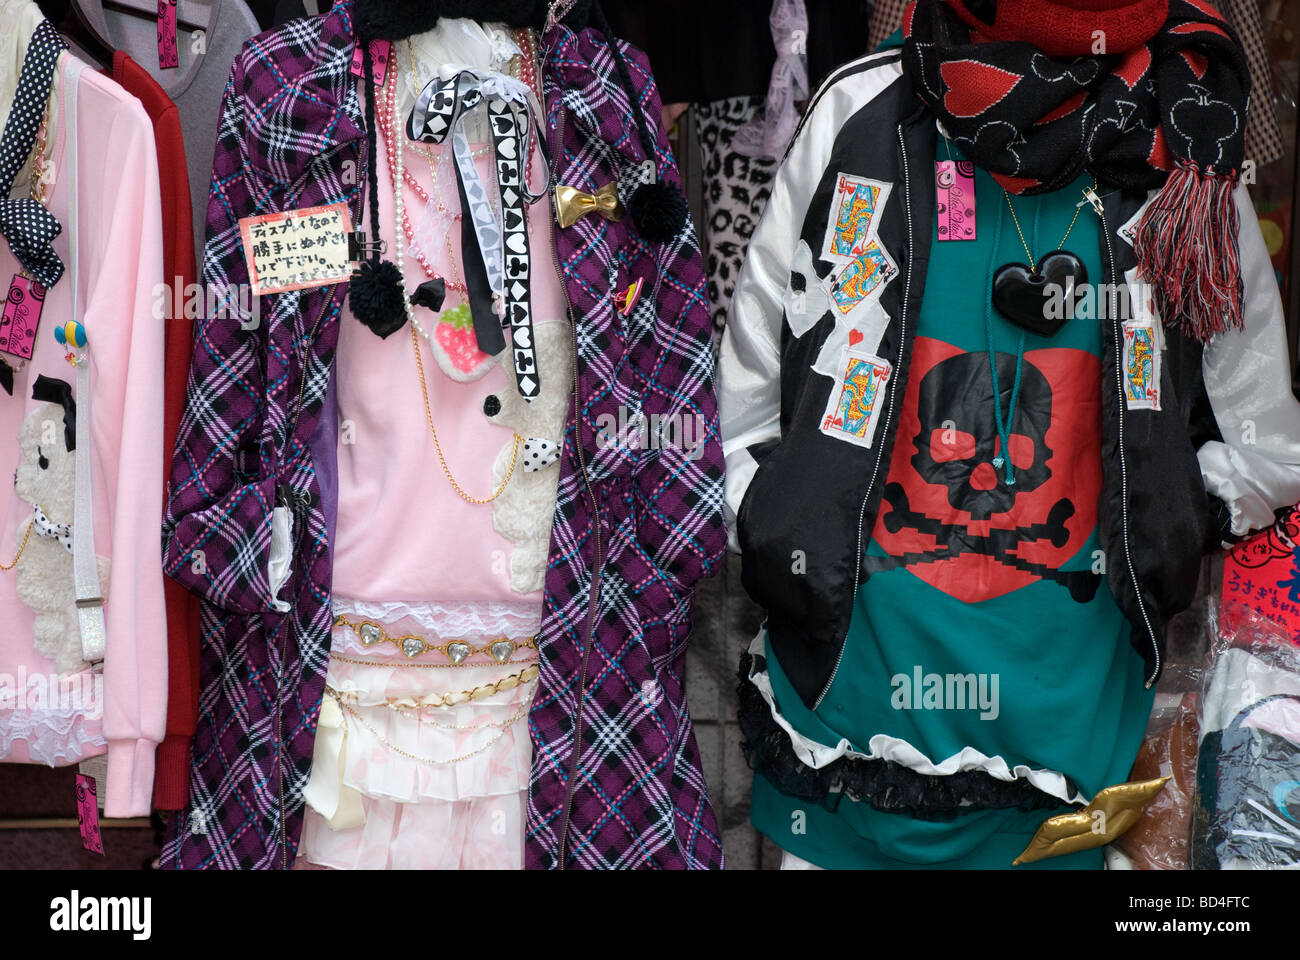 Clothes for sale on shopping street in Harajuku, Tokyo, Japan Stock Photo